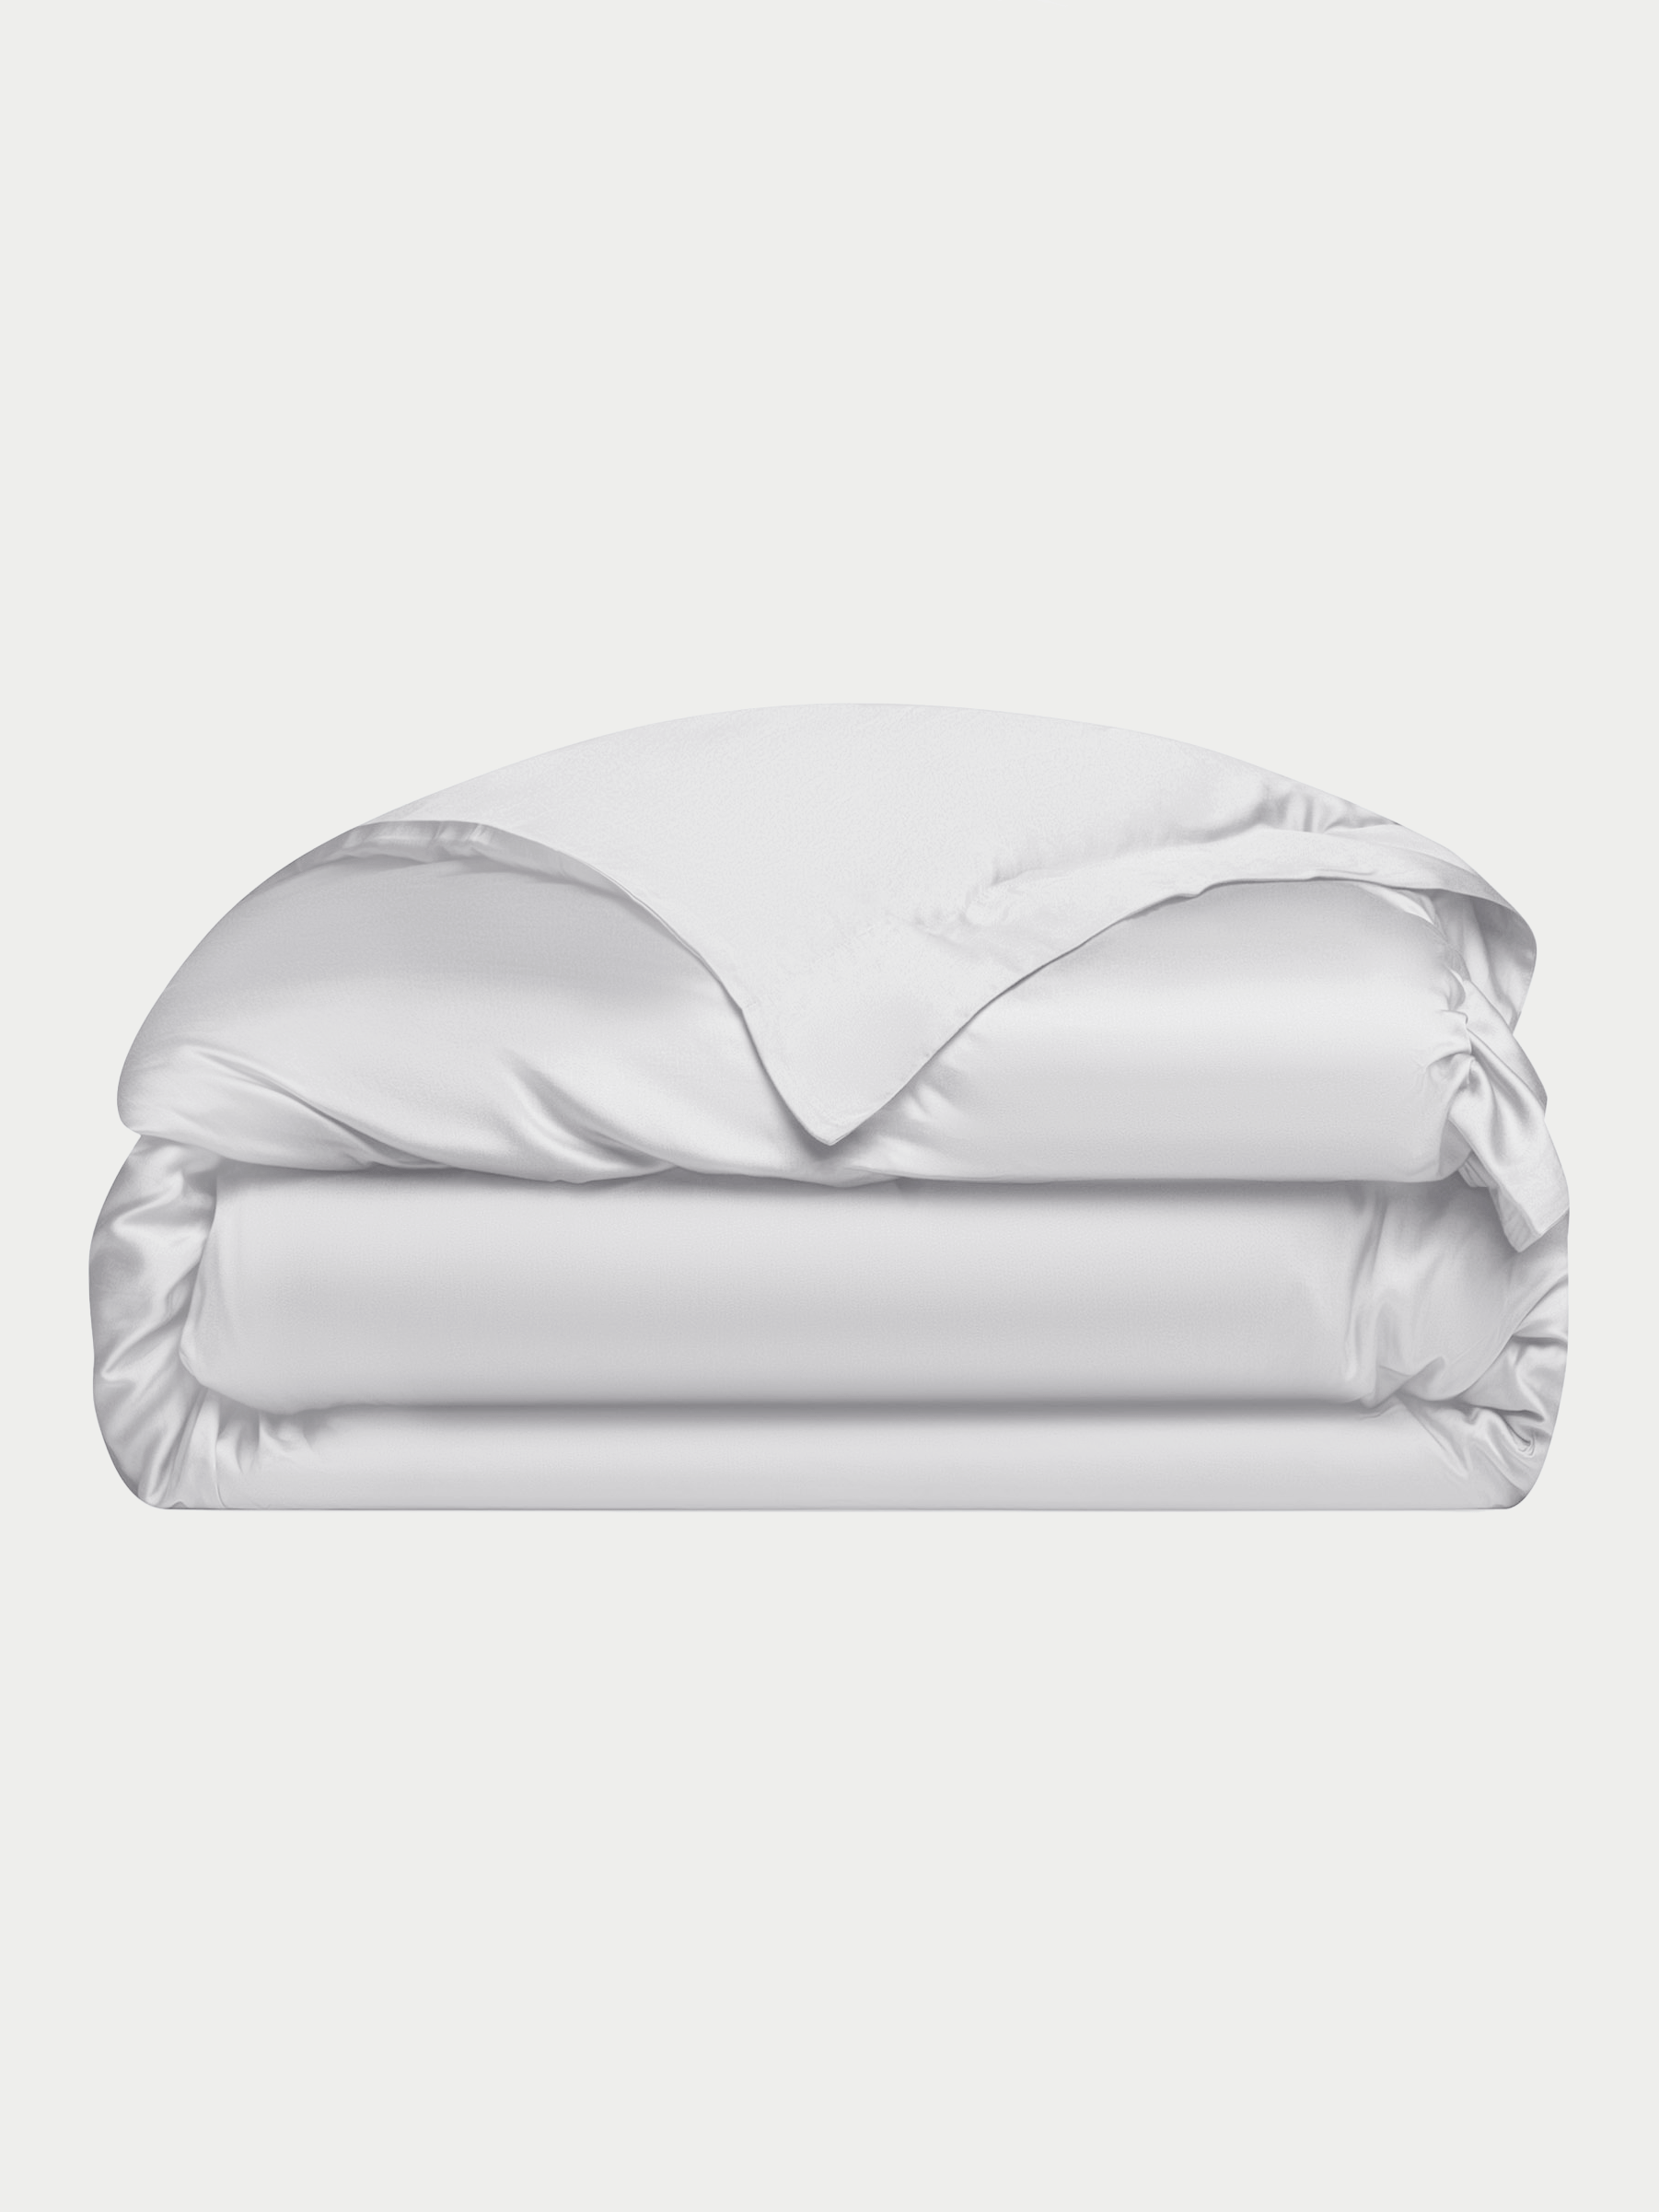 White duvet cover folded with white background |Color:White